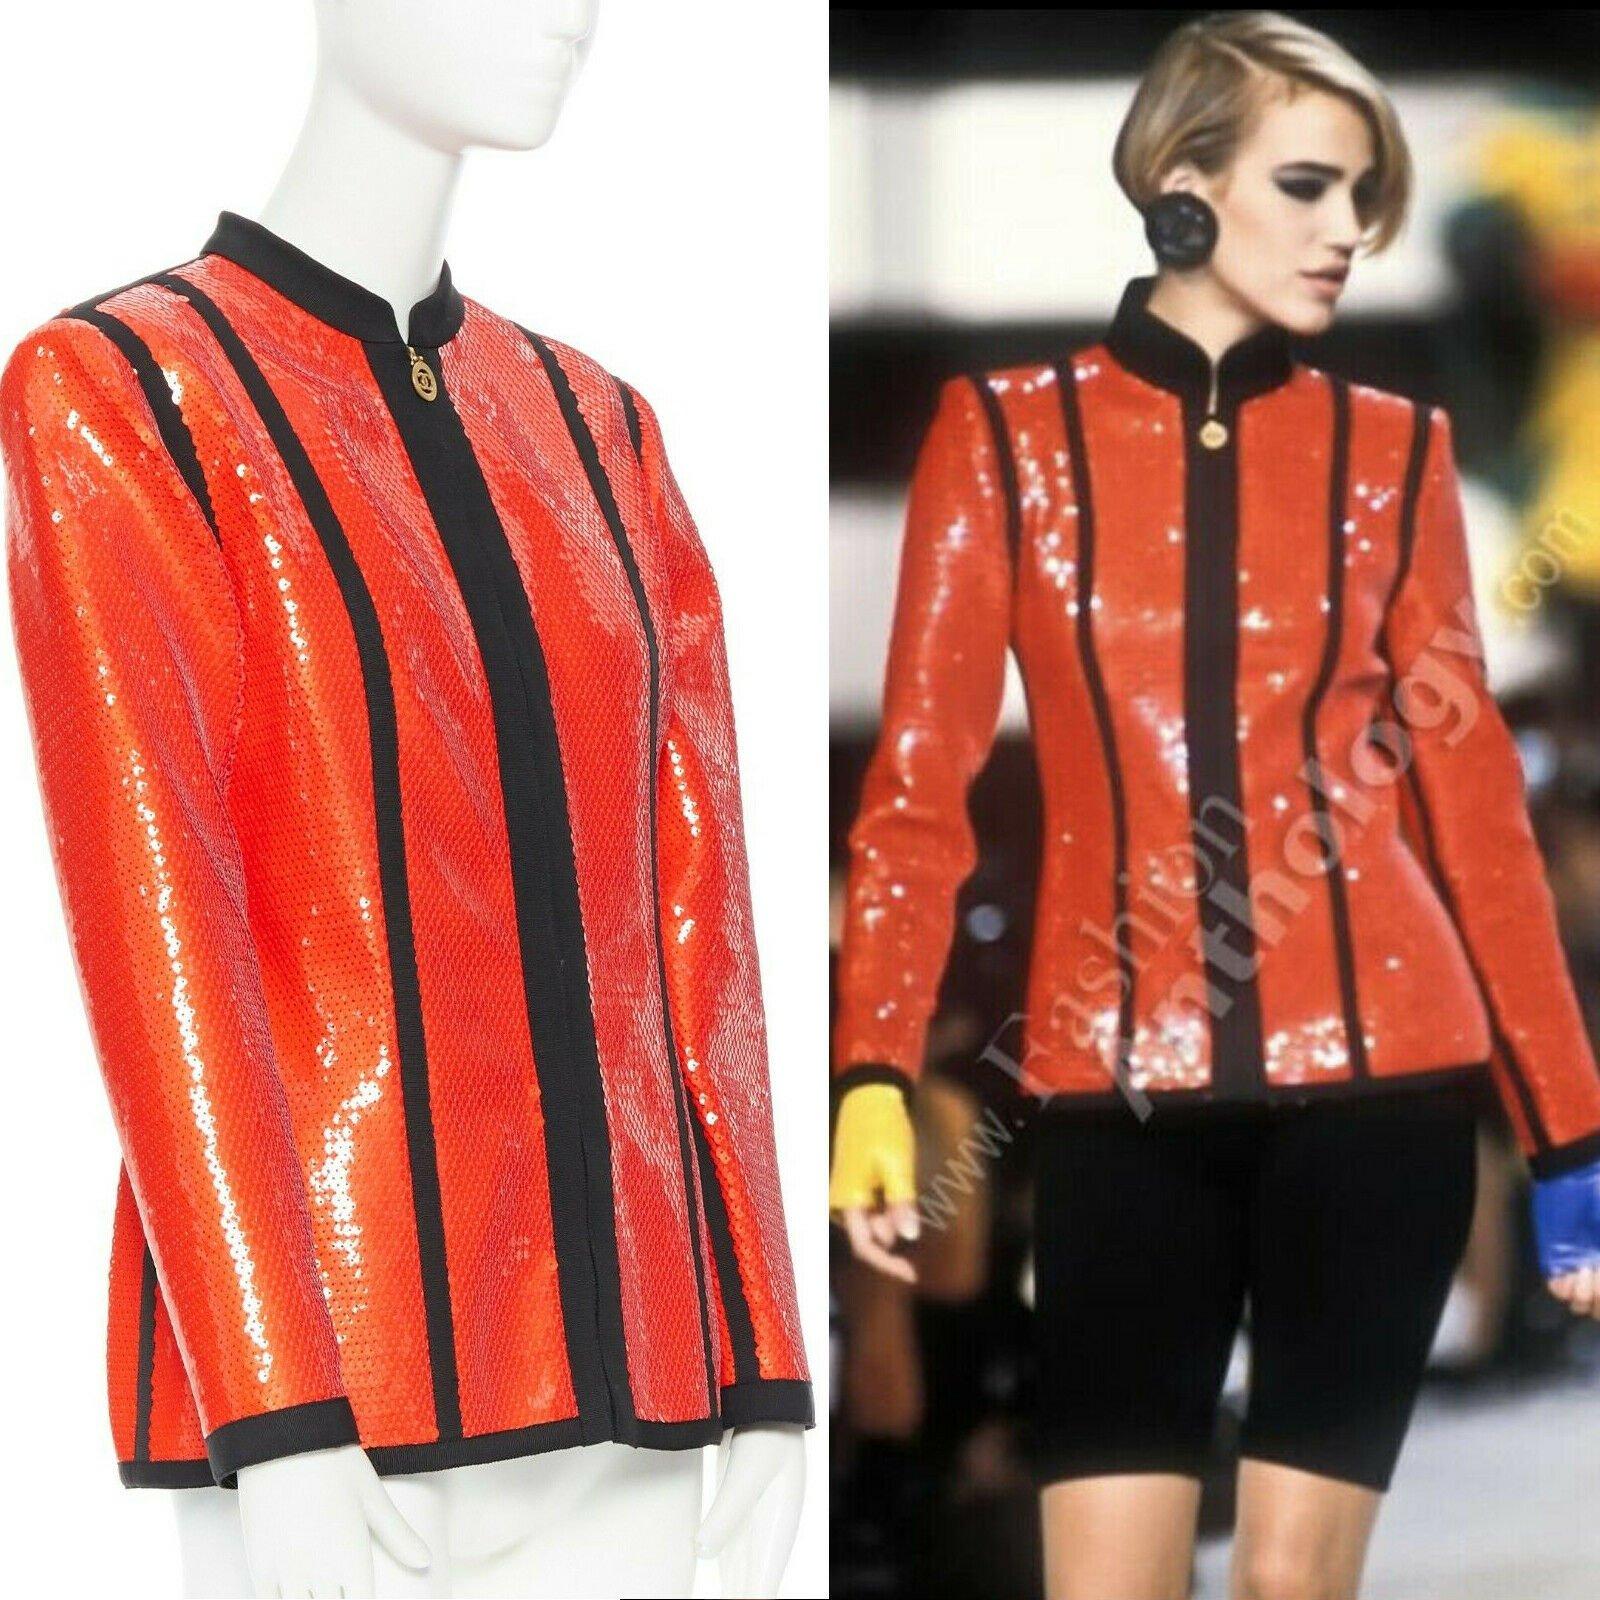 runway CHANEL 91P vintage red sequin black trim scuba suit zip CC jacket FR44 
Reference: ZING/A00087
Brand: Chanel 
Designer: Karl Lagerfeld 
Collection: Spring Summer 1991 Runway 
Material: Polyester 
Color: Red 
Pattern: Solid 
Closure: Zip